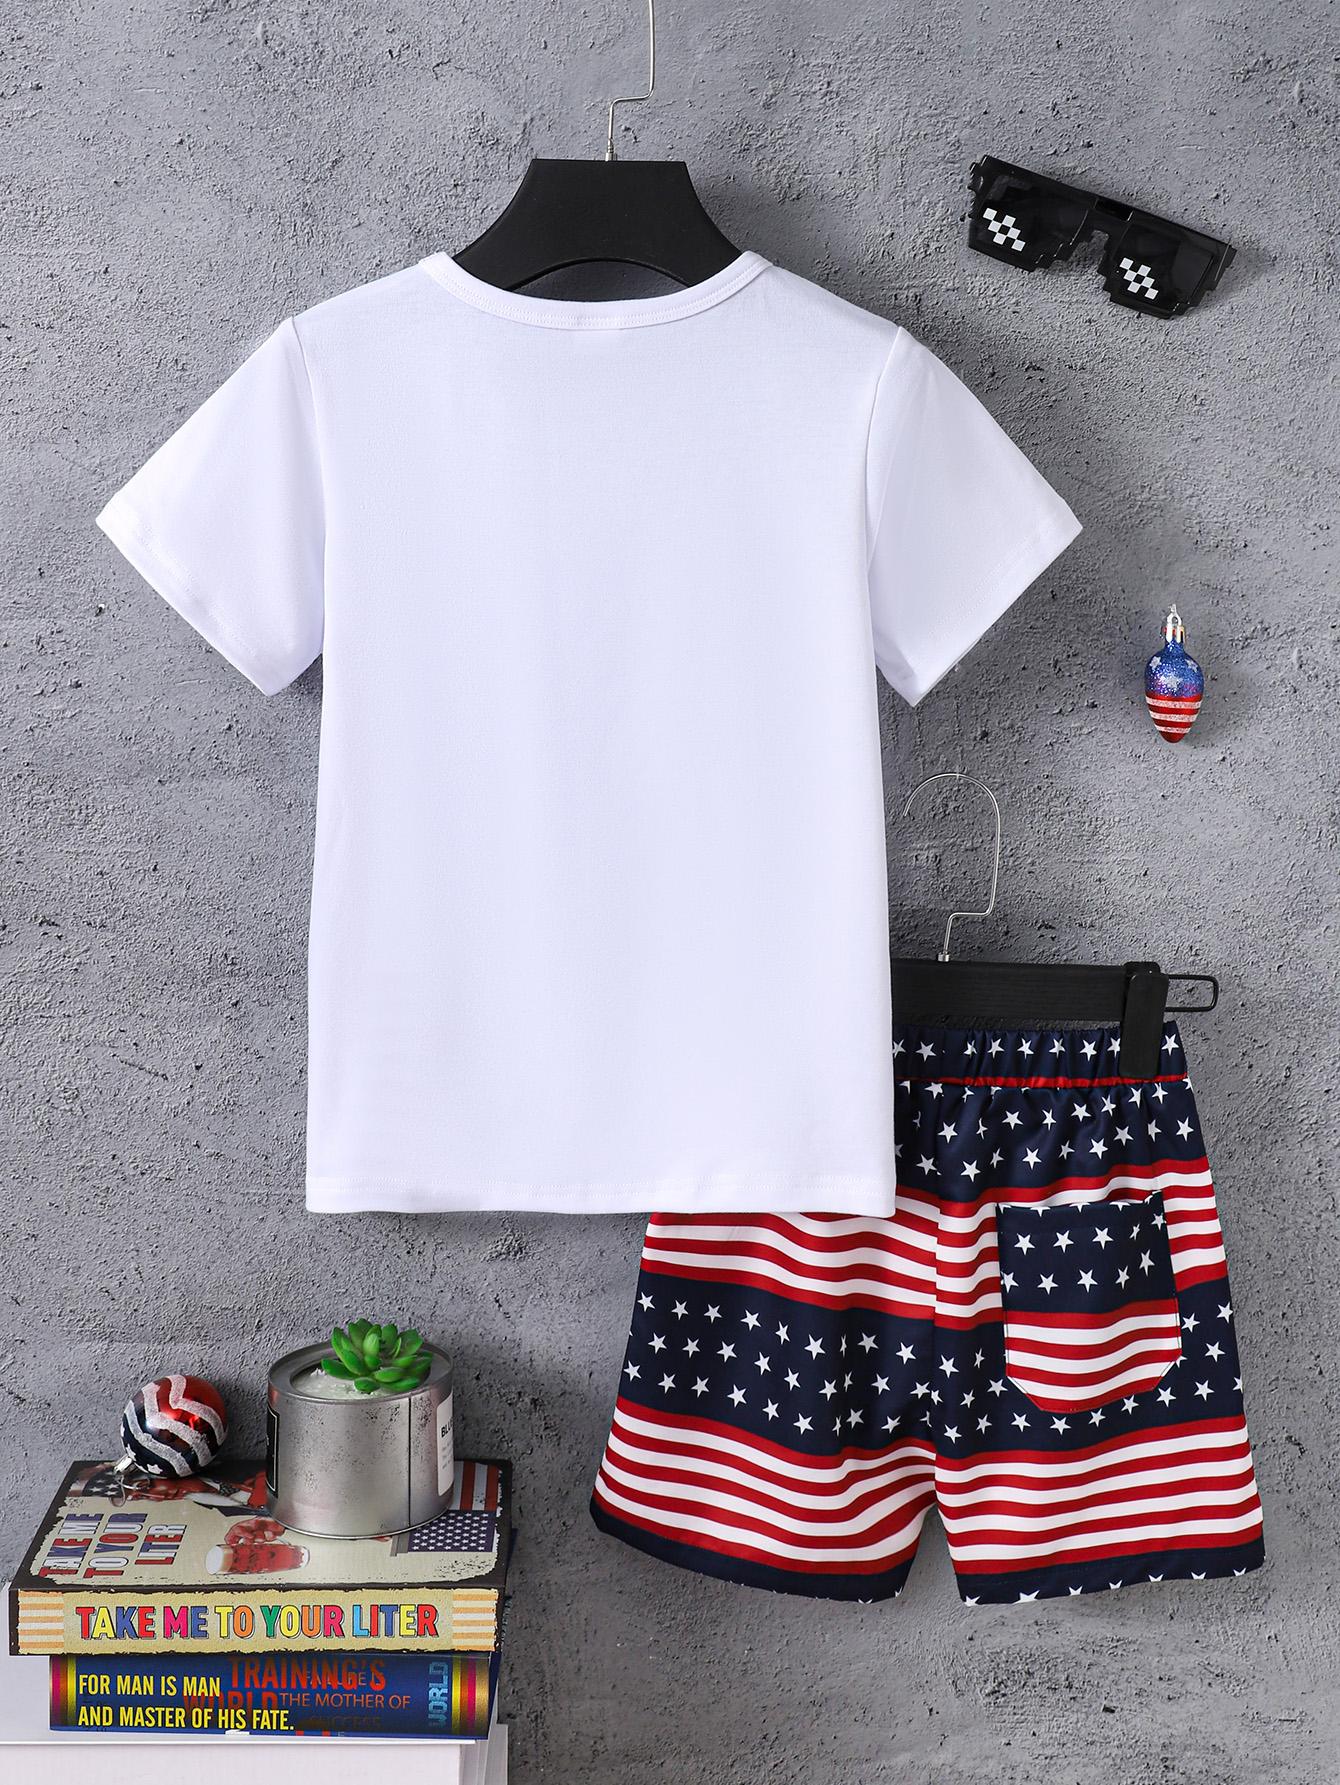 7-15Y Ready Stock Kid Boys Summer Outfits Fake Pocket Casual T-shirt Elastic Stars and Stripes Shorts 2Pcs Independence Day Clothing From 7Y-15Y White Catpapa 462312039